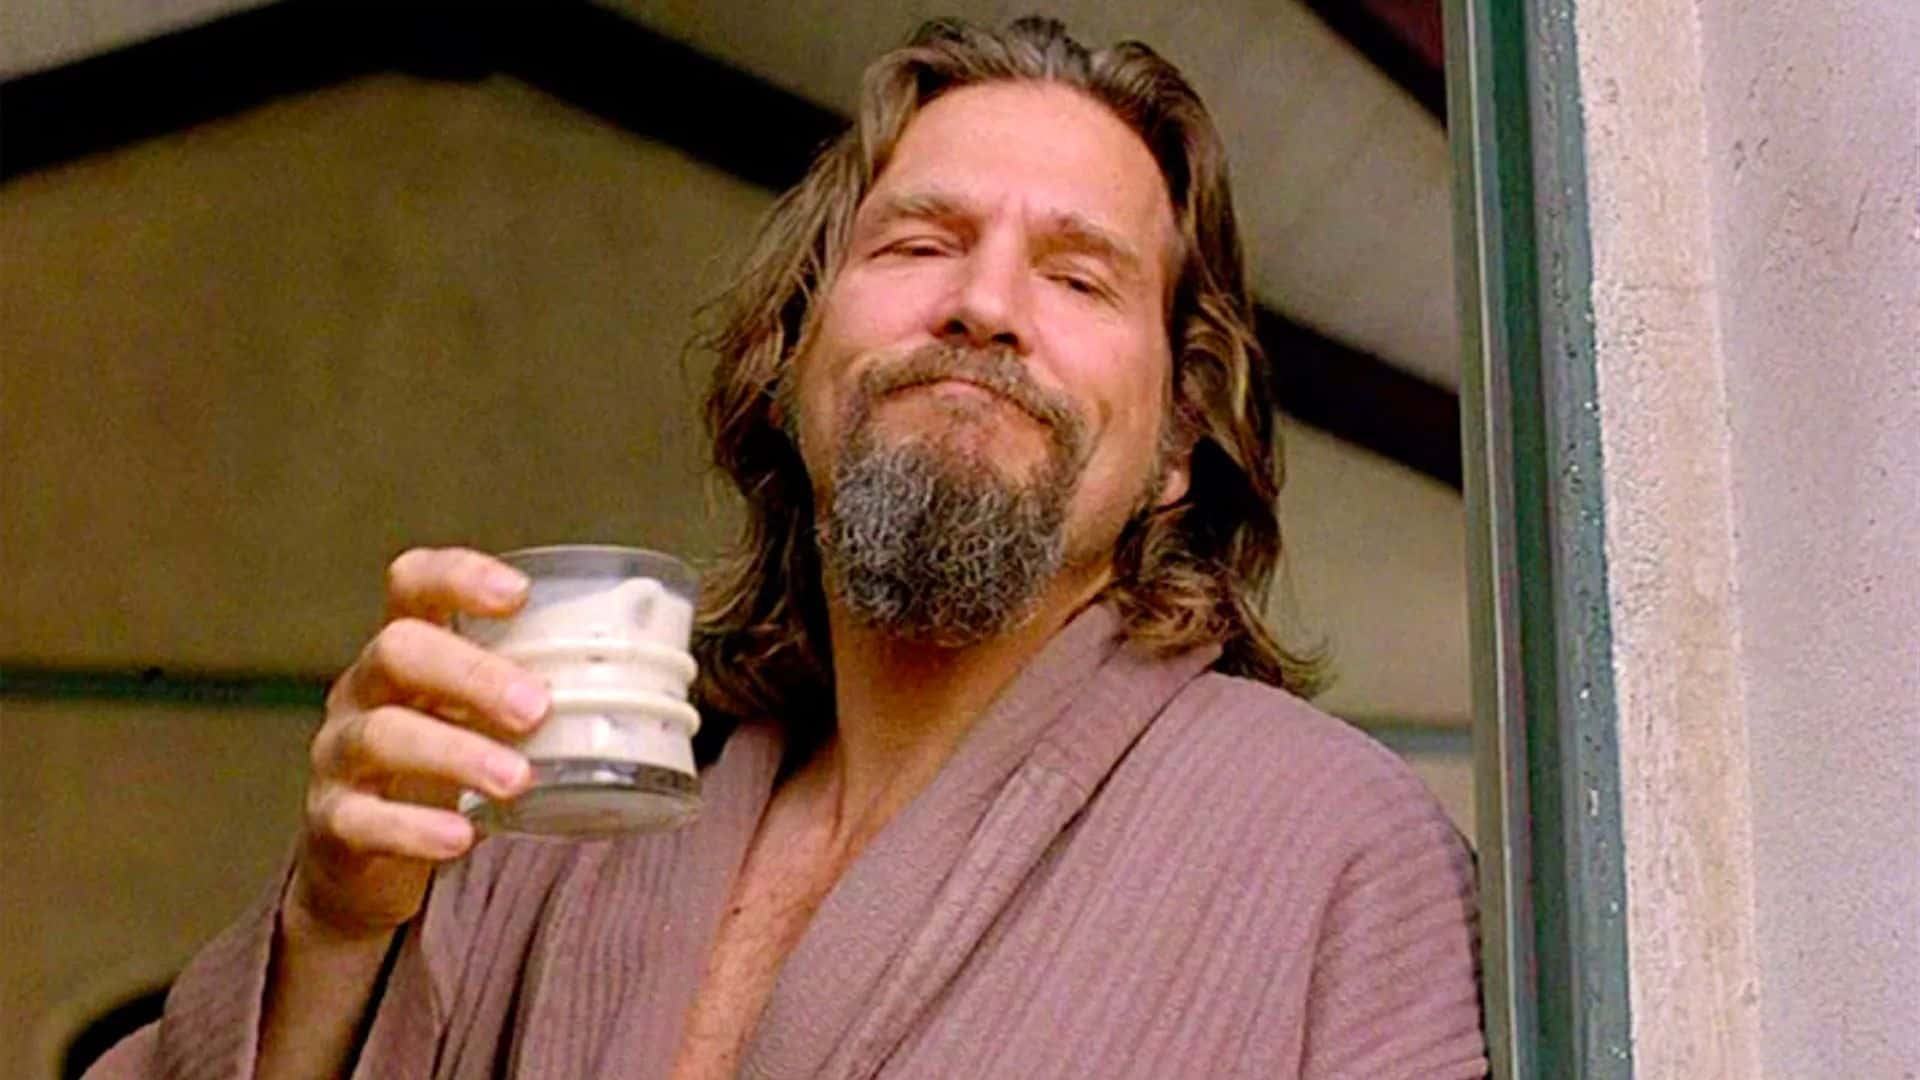 The Dude holds a White Russian while leaning in a doorway in this image from Working Title Films